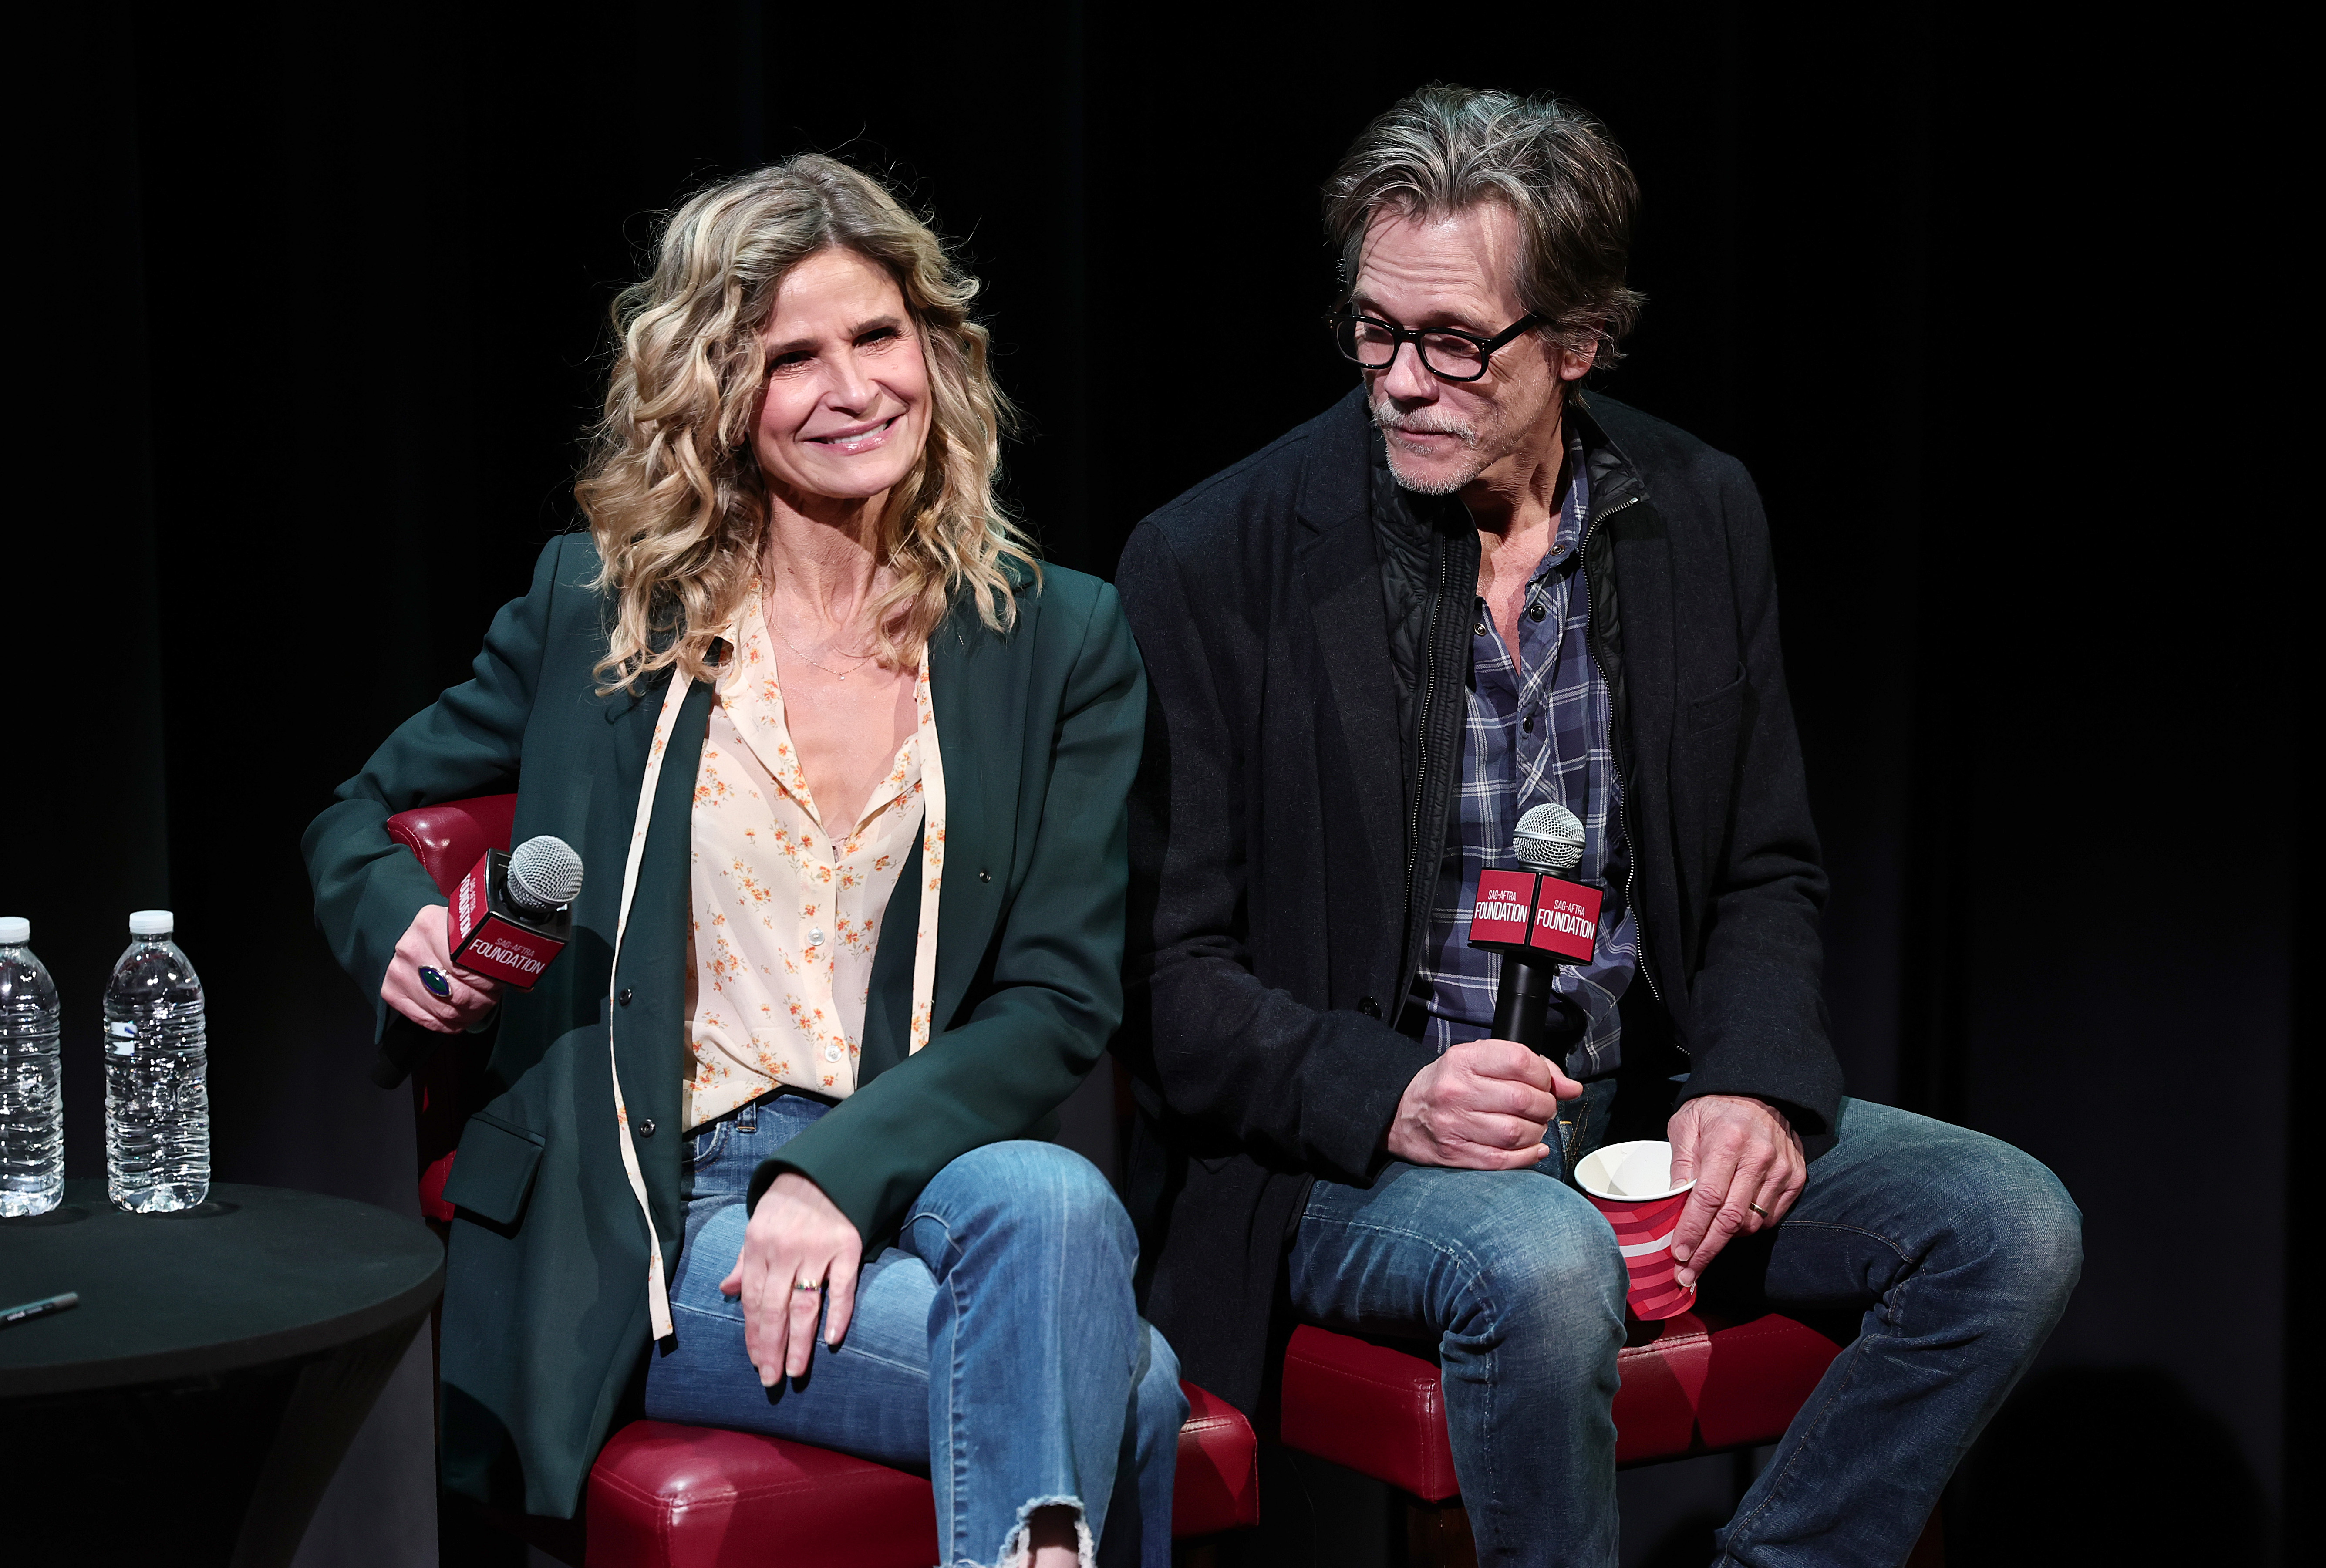 Kyra Sedgwick and Kevin Bacon participate in the SAG-AFTRA Foundation's "Space Oddity" Screening and Q&A at the Robin Williams Center in New York City on March 30, 2023 | Source: Getty Images